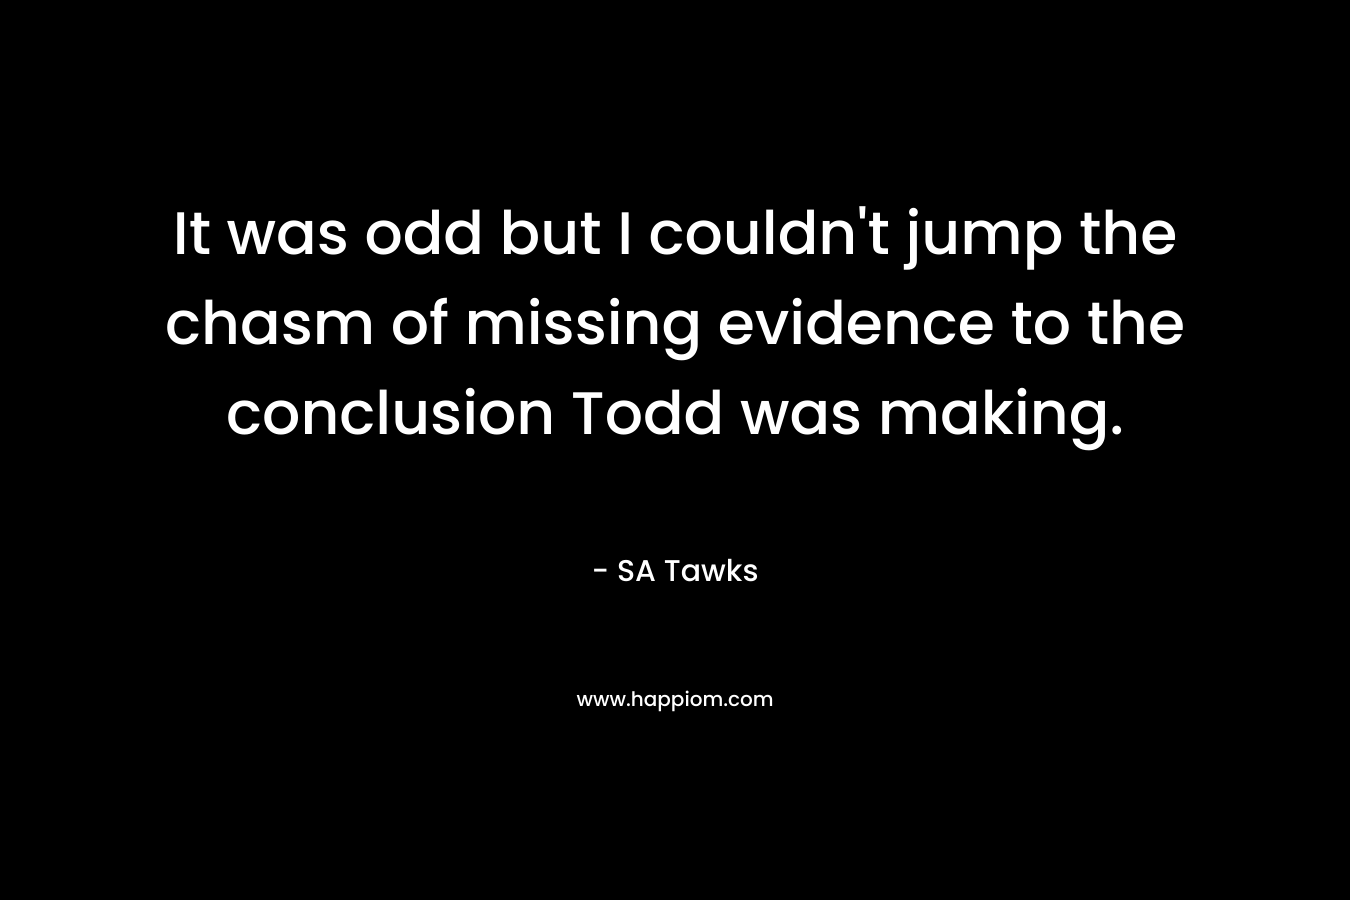 It was odd but I couldn’t jump the chasm of missing evidence to the conclusion Todd was making. – SA Tawks